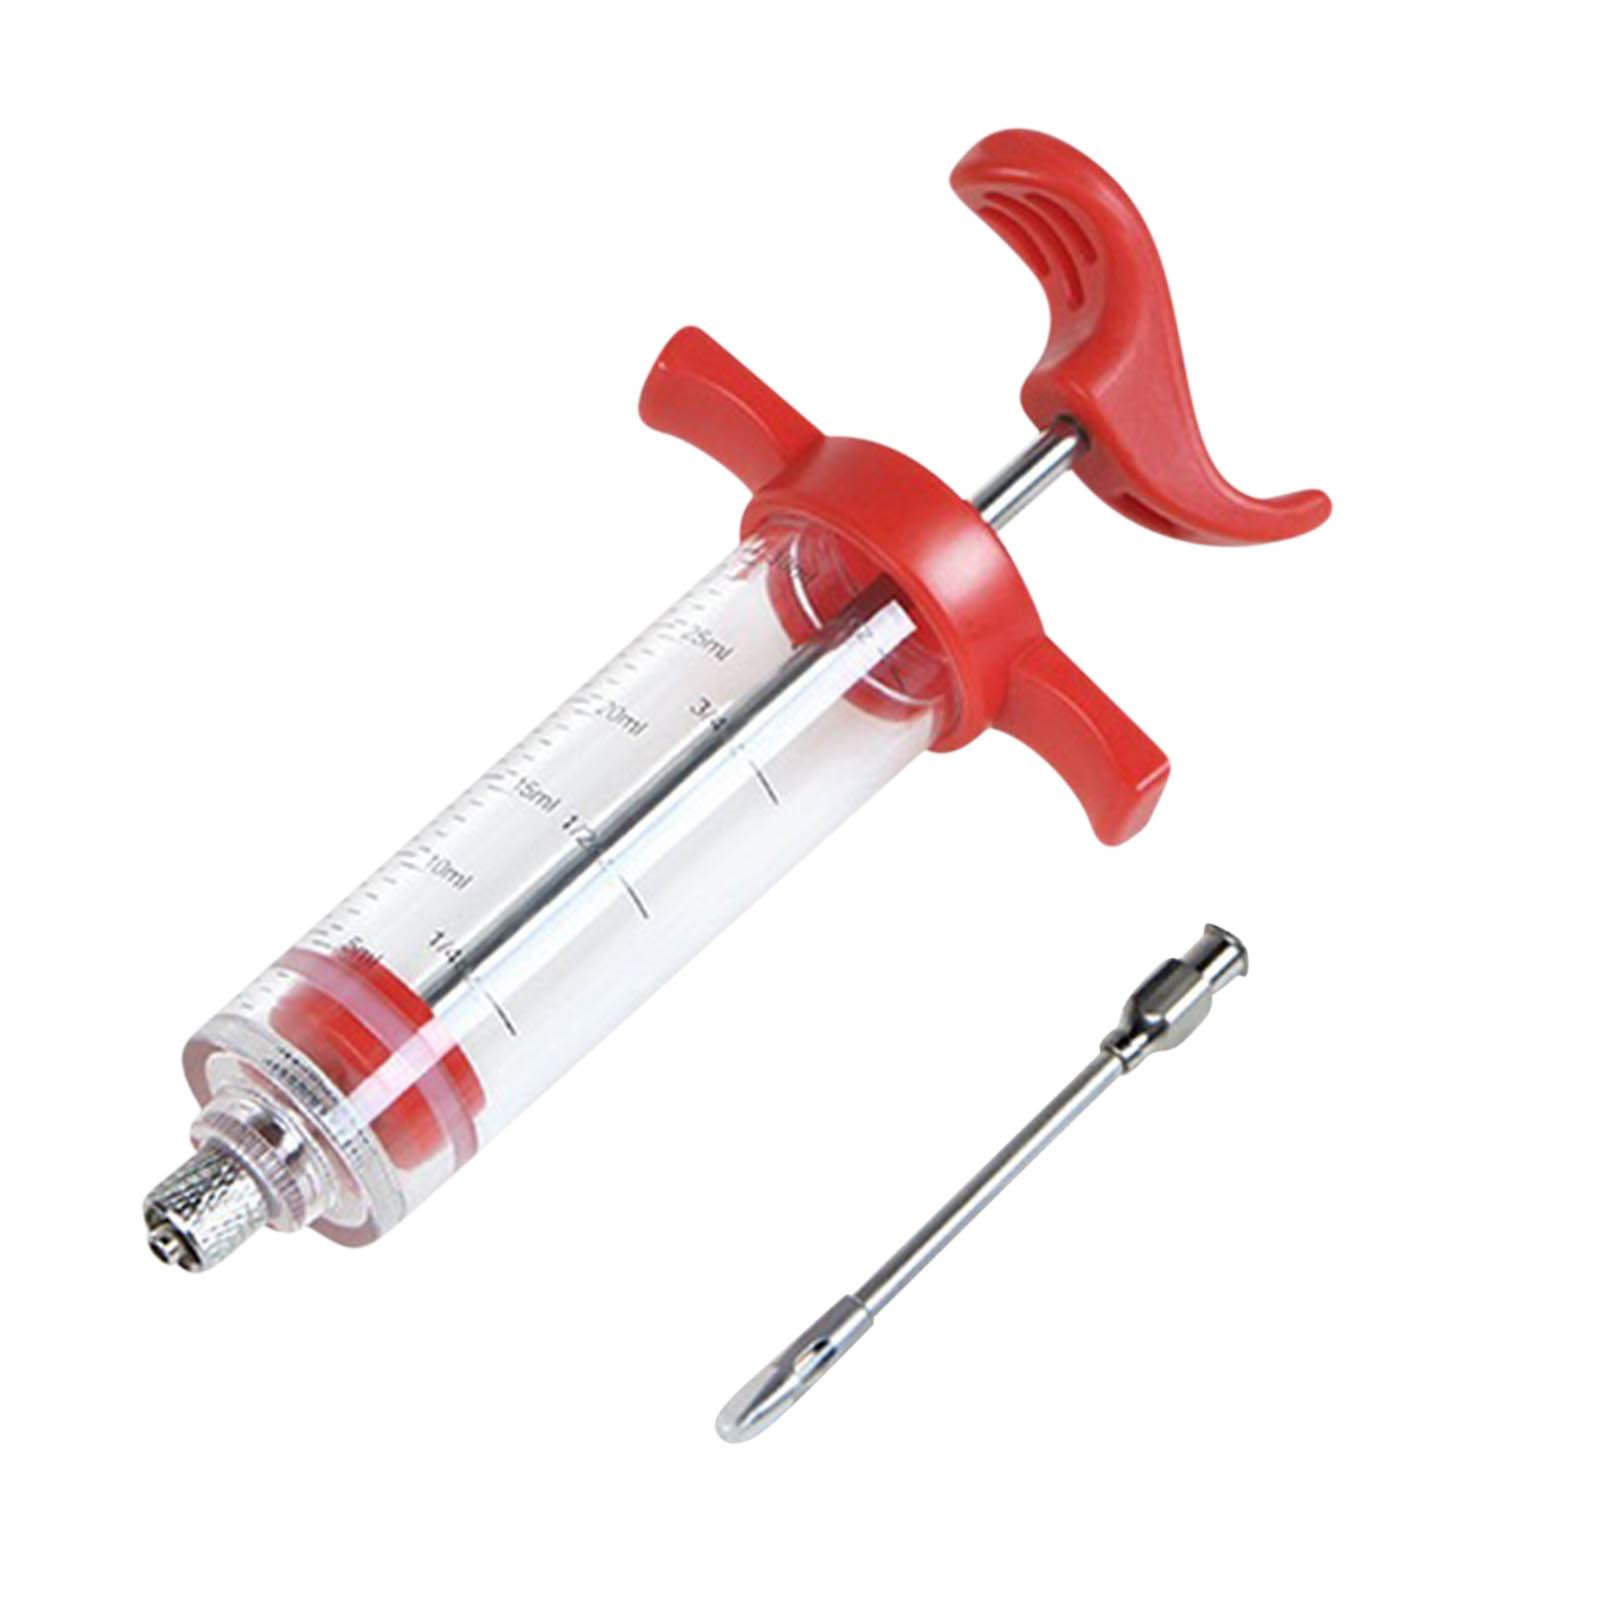 Herrnalise Stainless Steel Meat Injector Syringe For BBQ Grill Professional-Smoker Seasoning Culinary Barbecue Syringe Barbecue Tool Kitchen Essentials on Sale - image 2 of 9